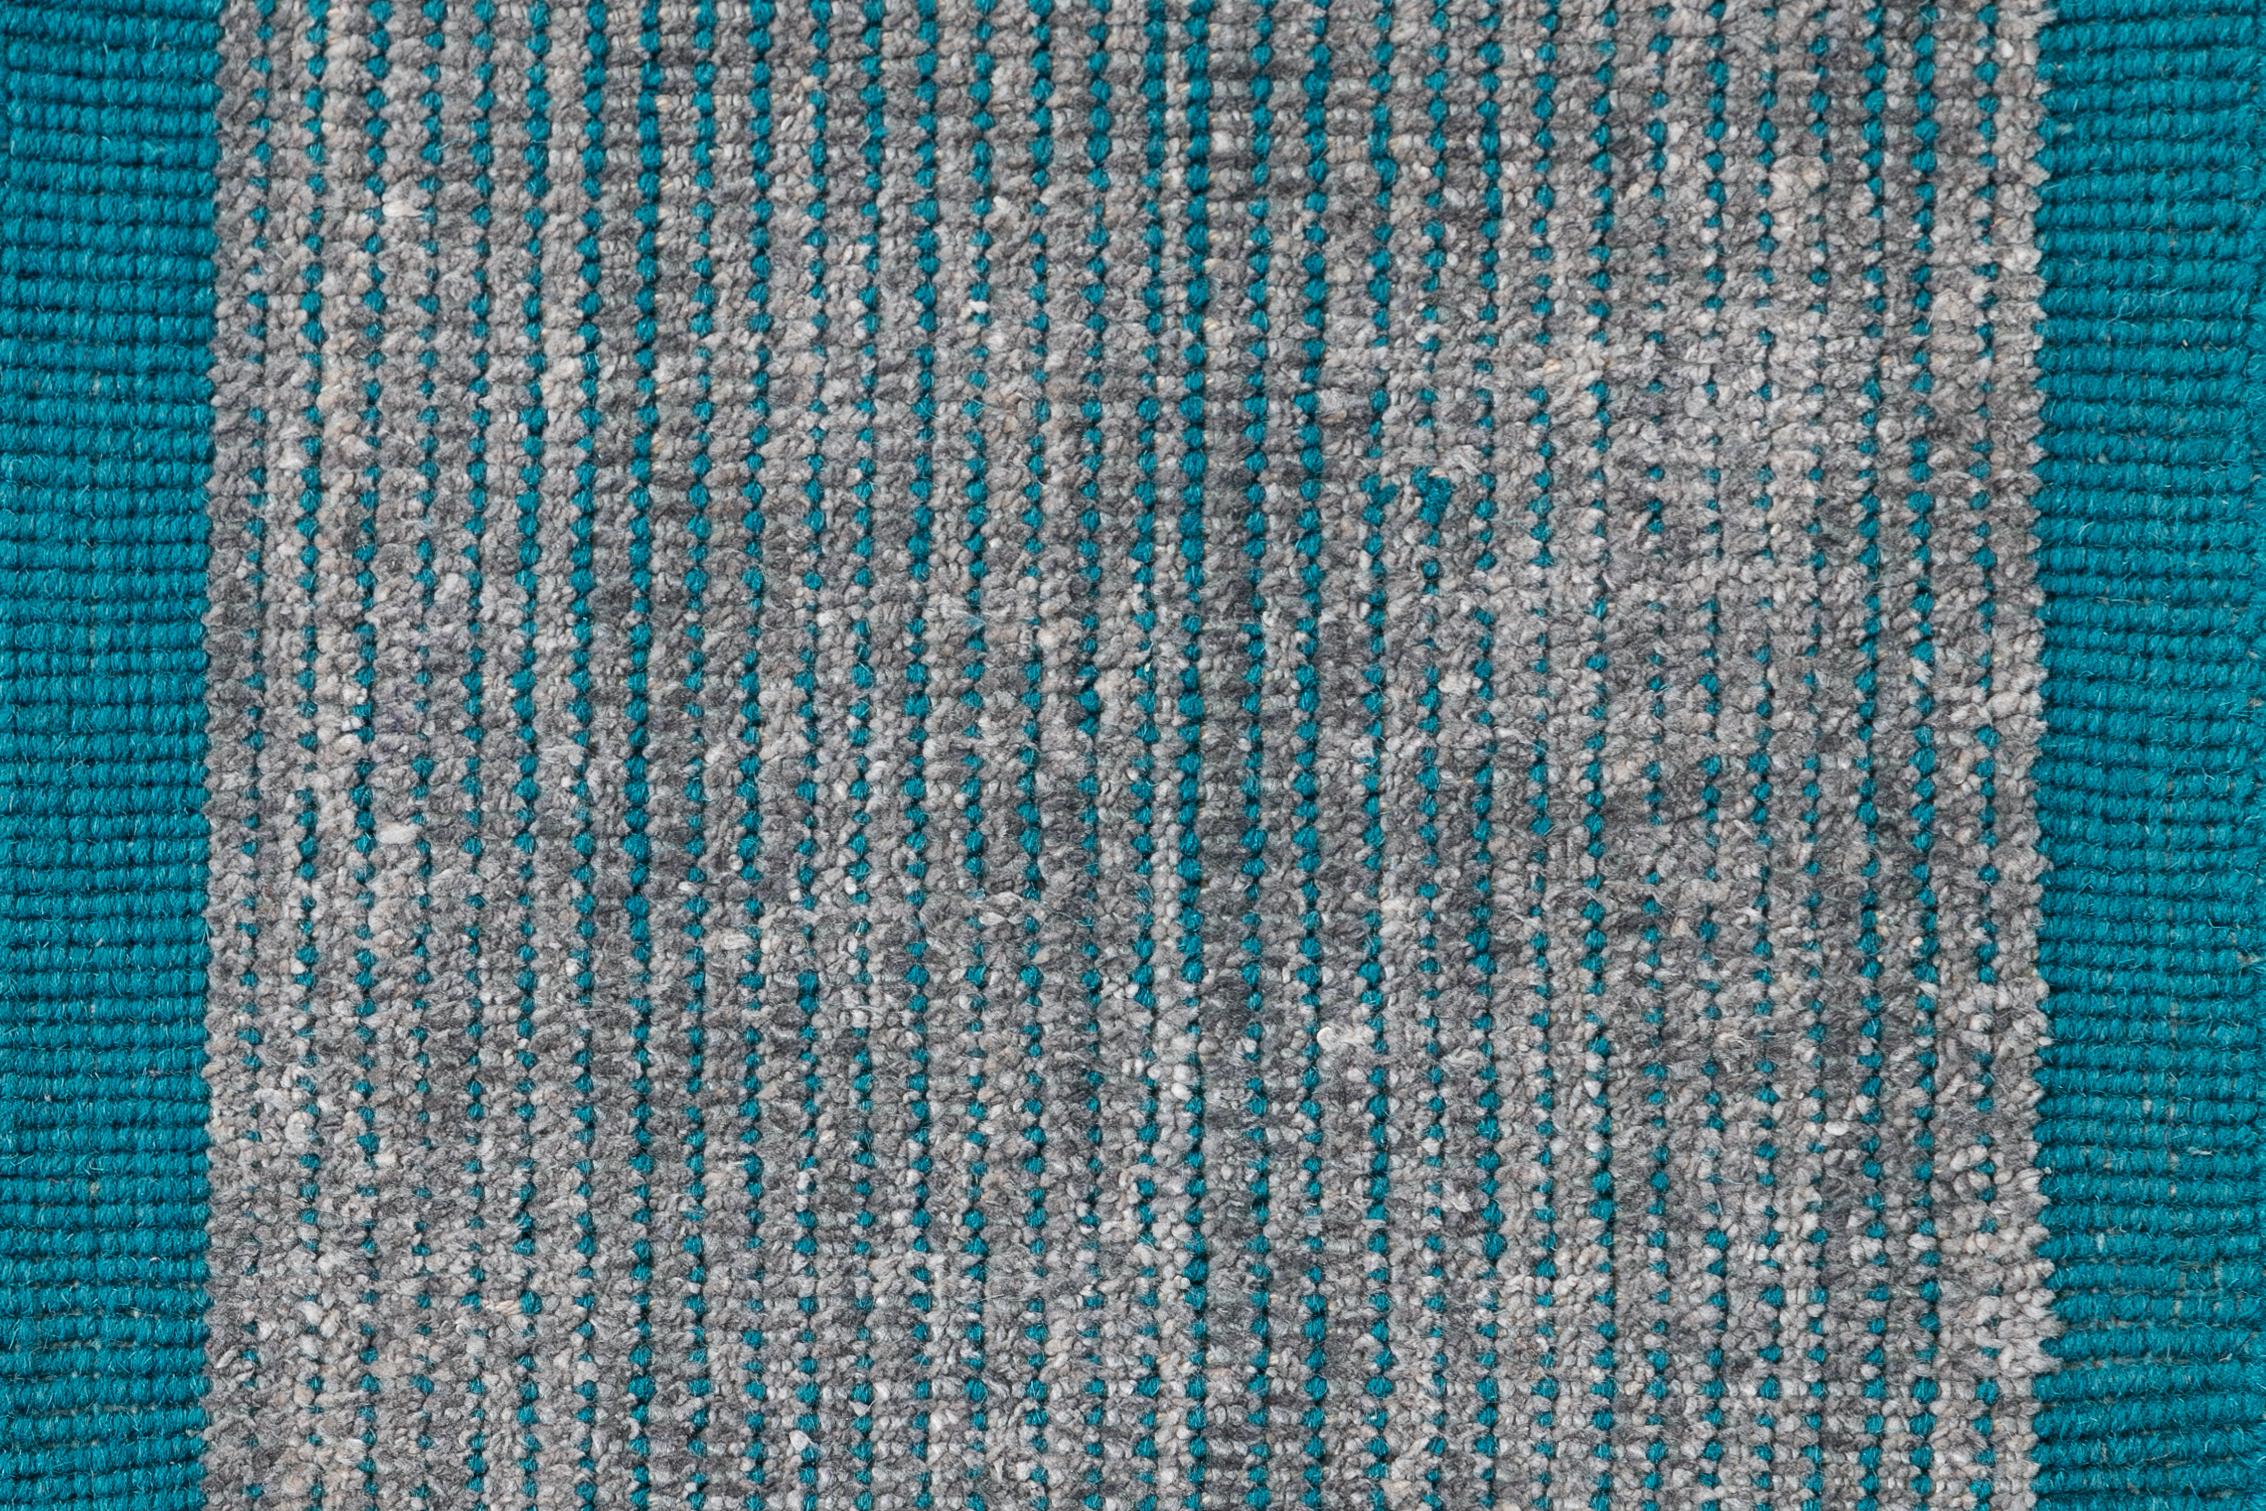 Boho custom rug. Custom sizes and colors made-to-order.

Material: Wool/bamboo silk
Lead time: Approximate 12 wks
Available colors: 100+ shades.